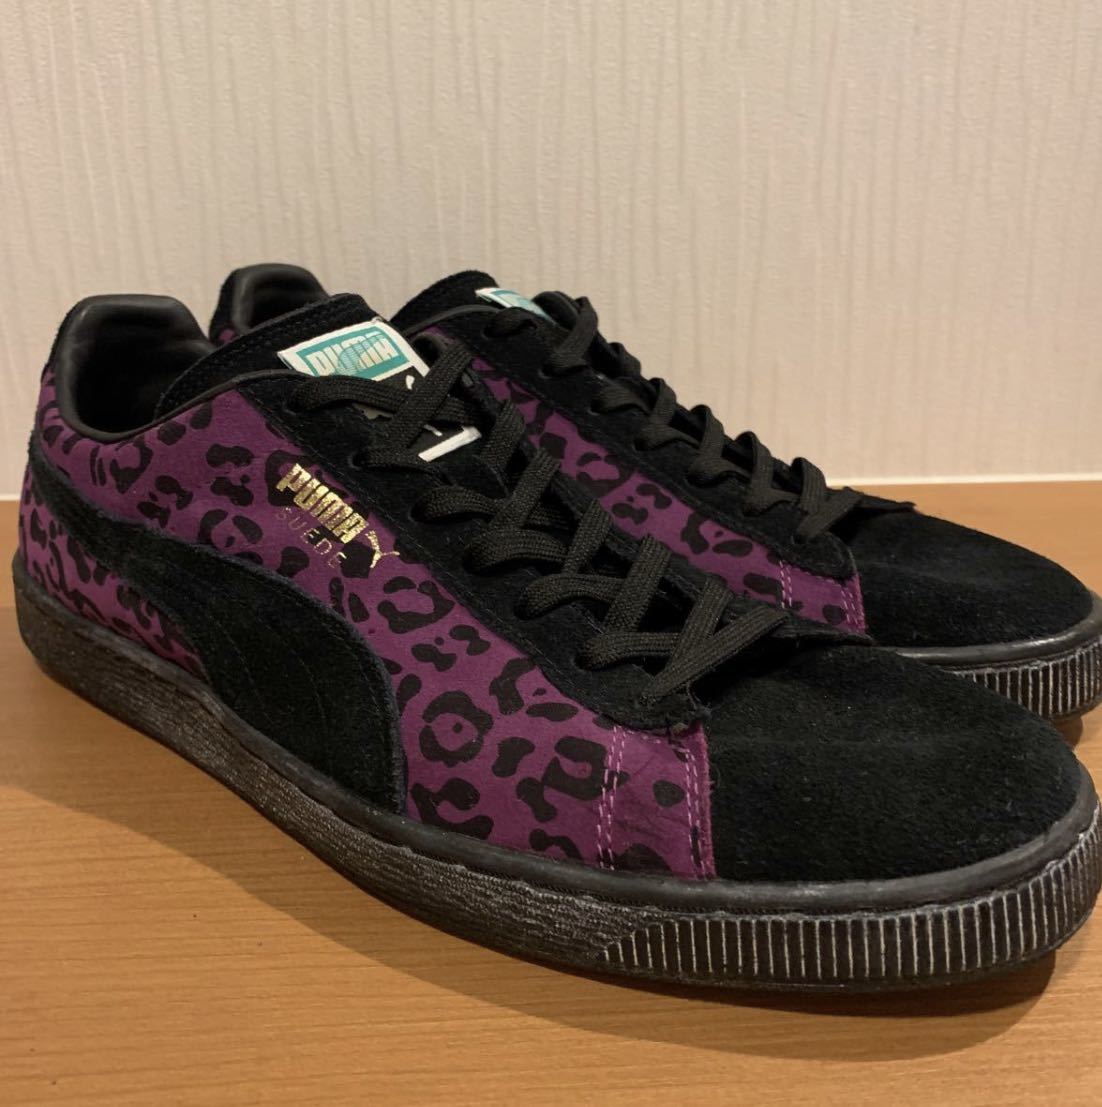  records out of production PUMA SUEDE LEOPARD Puma suede .us12